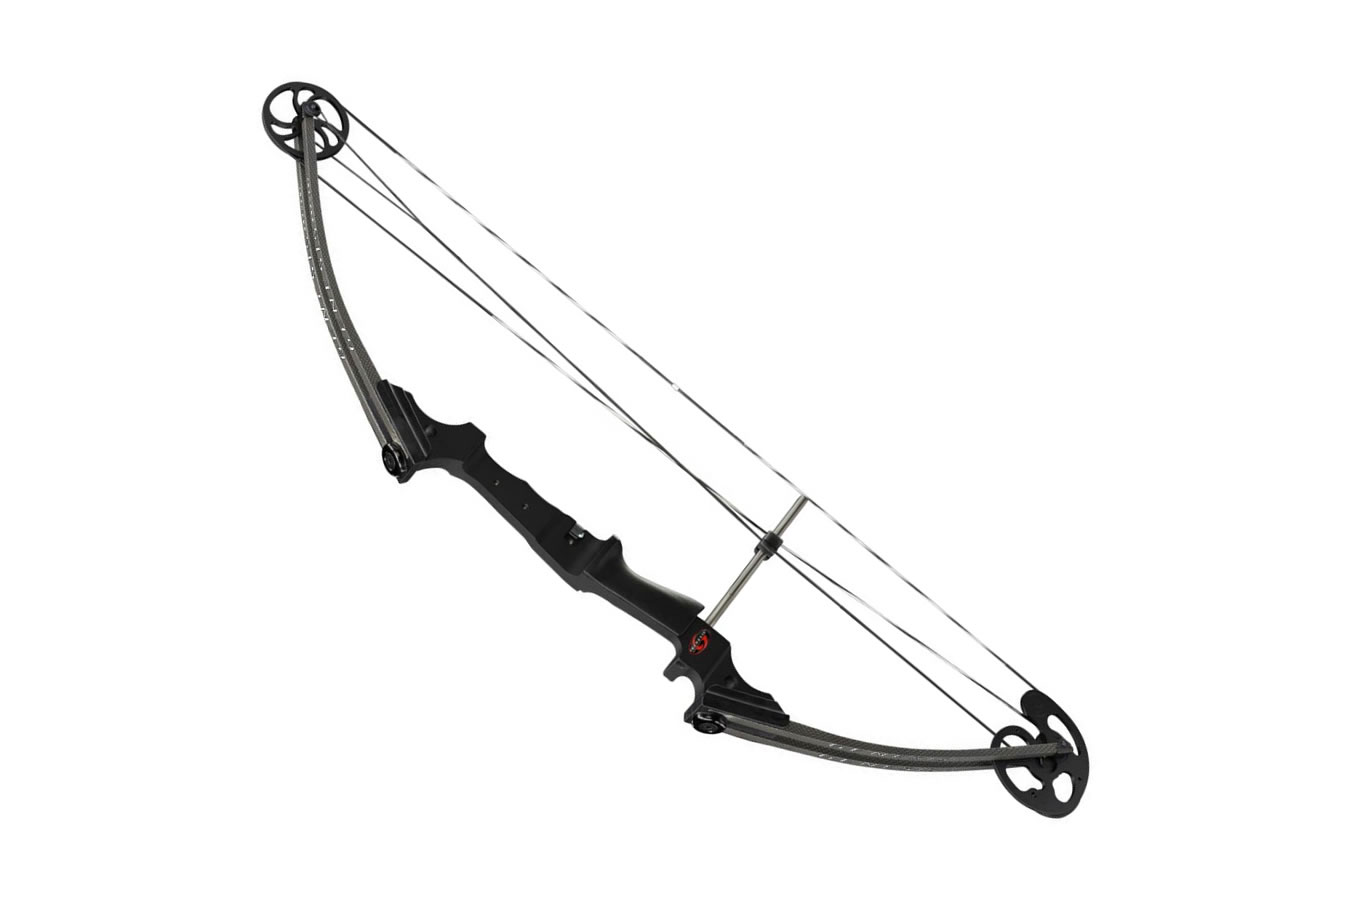 Genesis Bows Genesis Compound Bow, Adjustable Draw Weight / Length for Sale, Online Archery Store